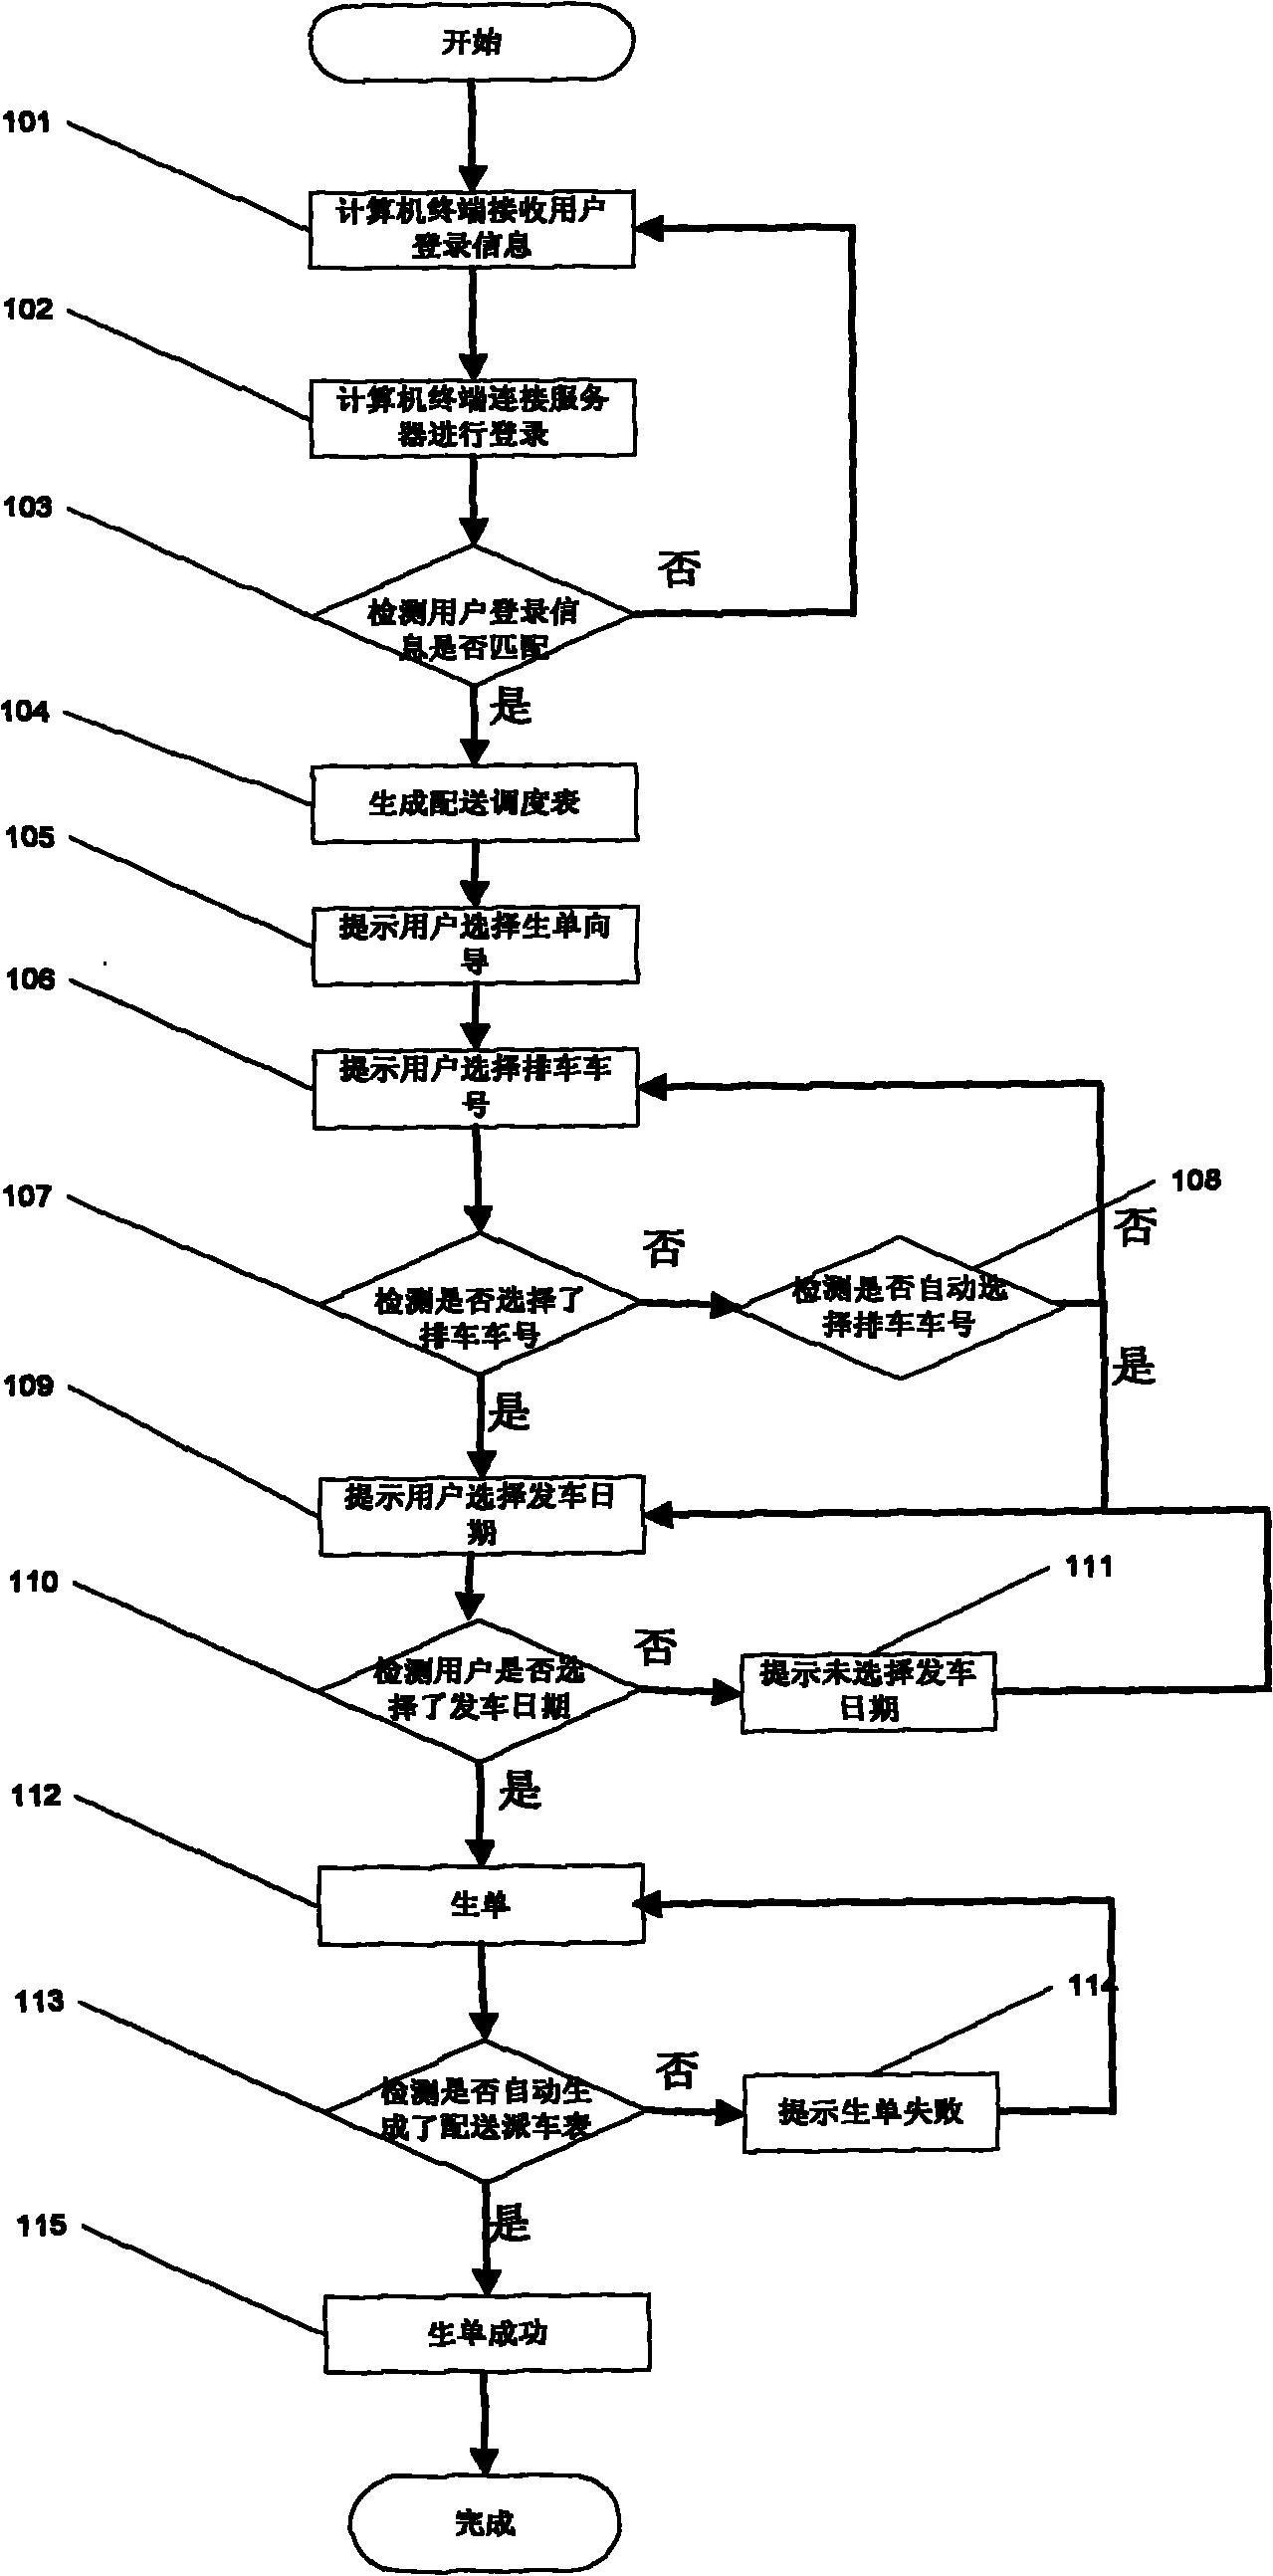 Method for generating distributing and dispatching document